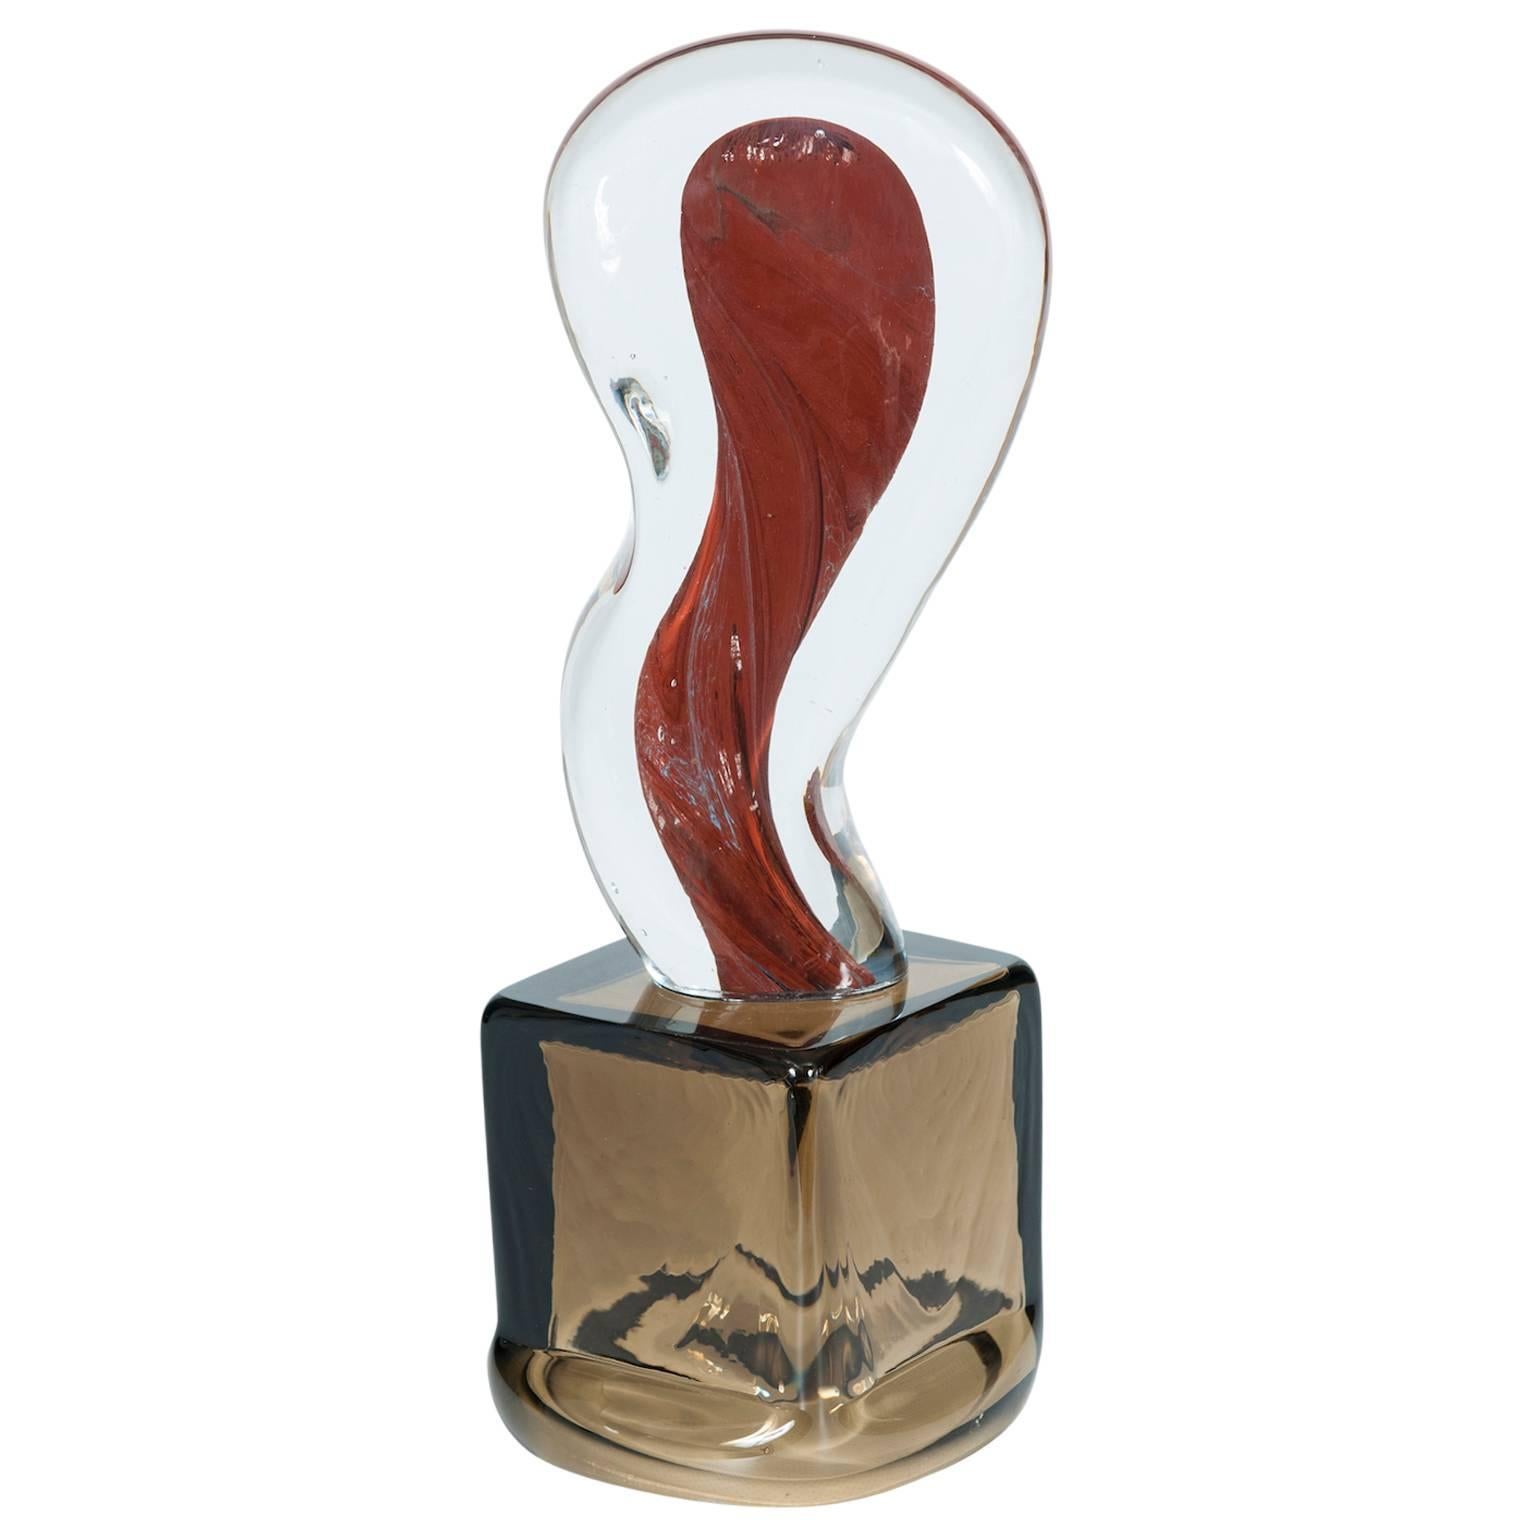 Italian Venetian Sculpture "Abstract" in Murano Glass, by Romano Donà, 1980s For Sale